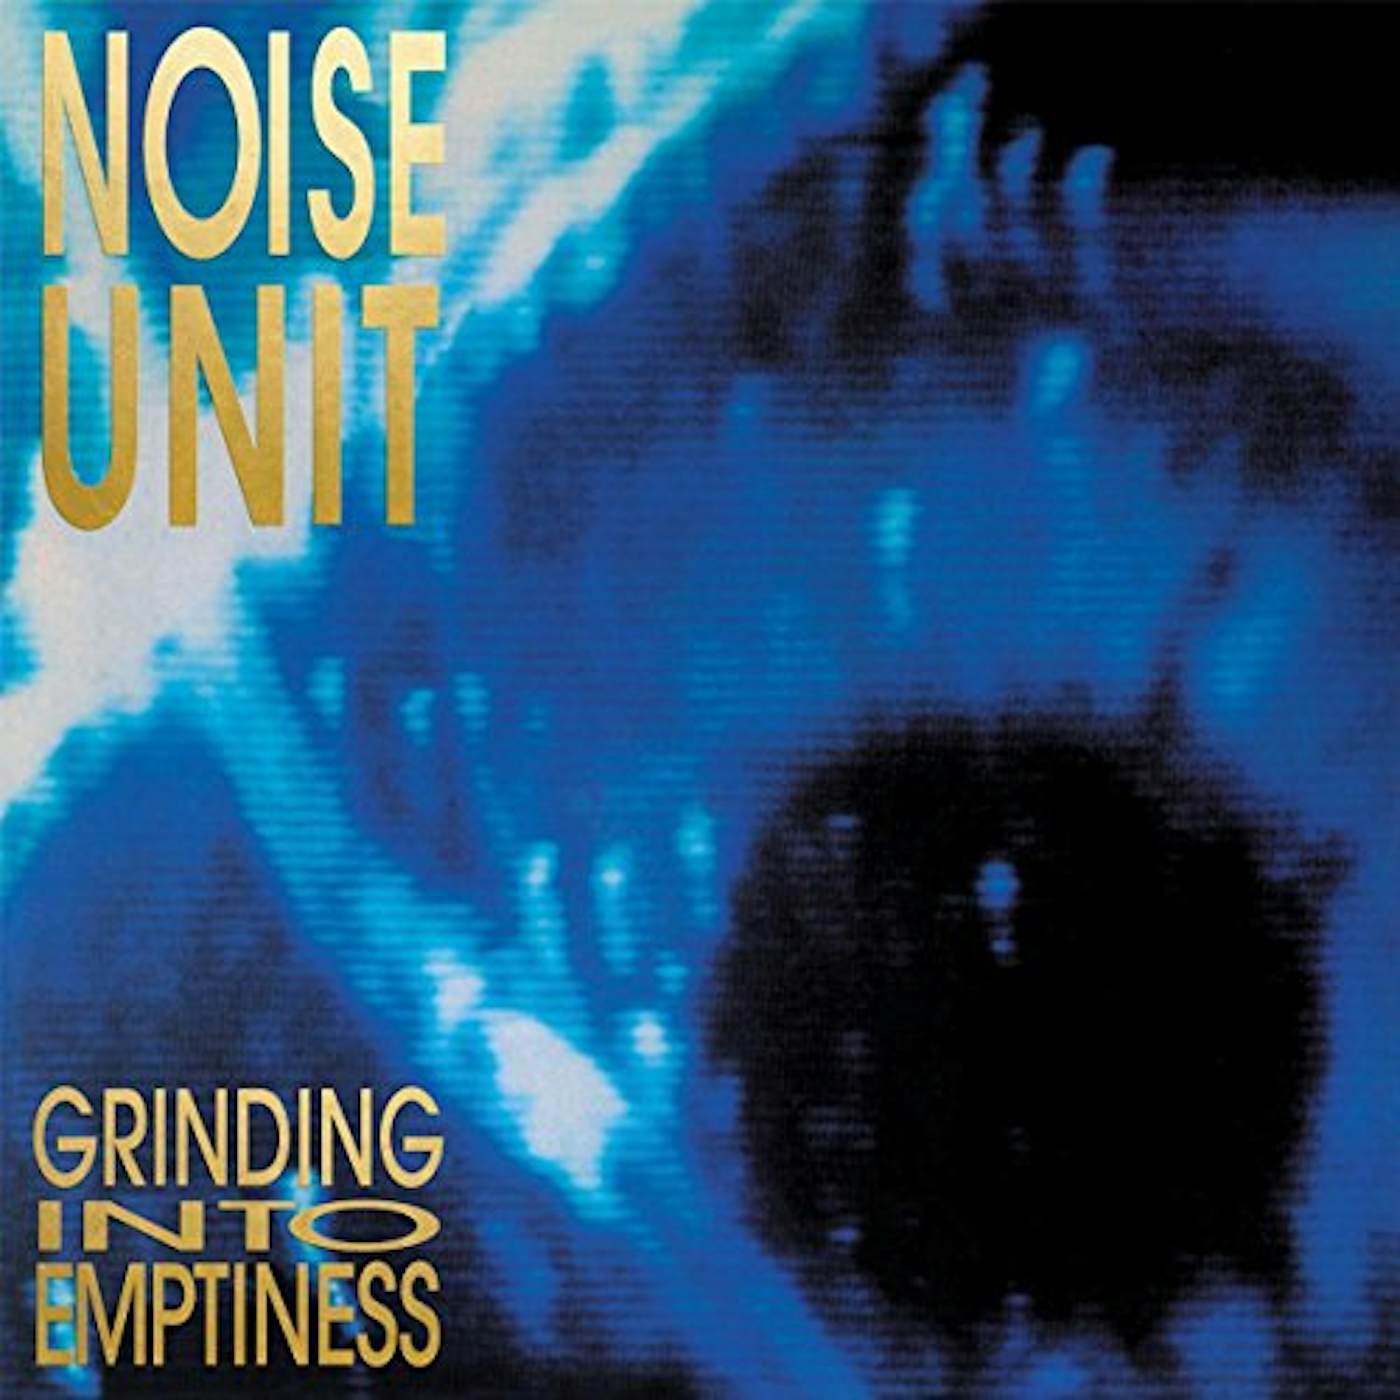 Noise Unit GRINDING INTO EMTPINESS Vinyl Record